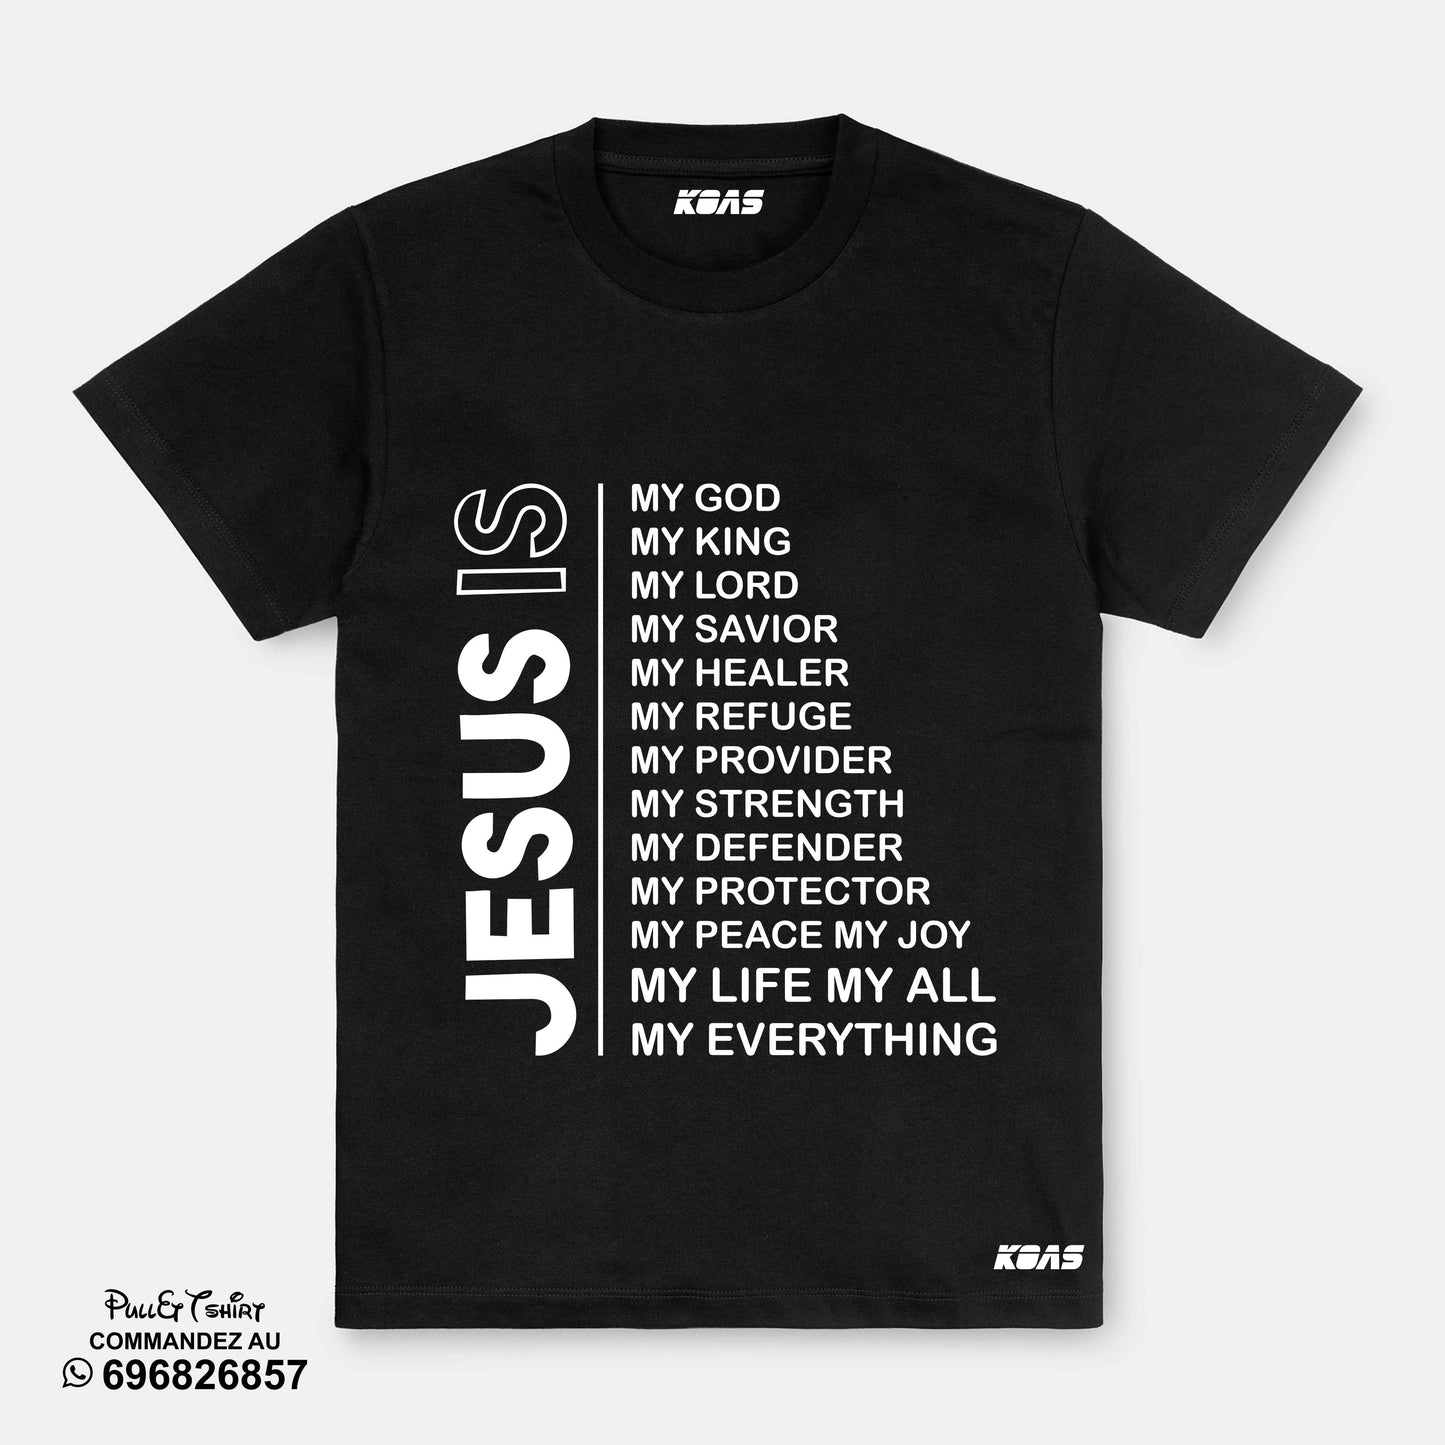 Jésus is everything - Tshirt